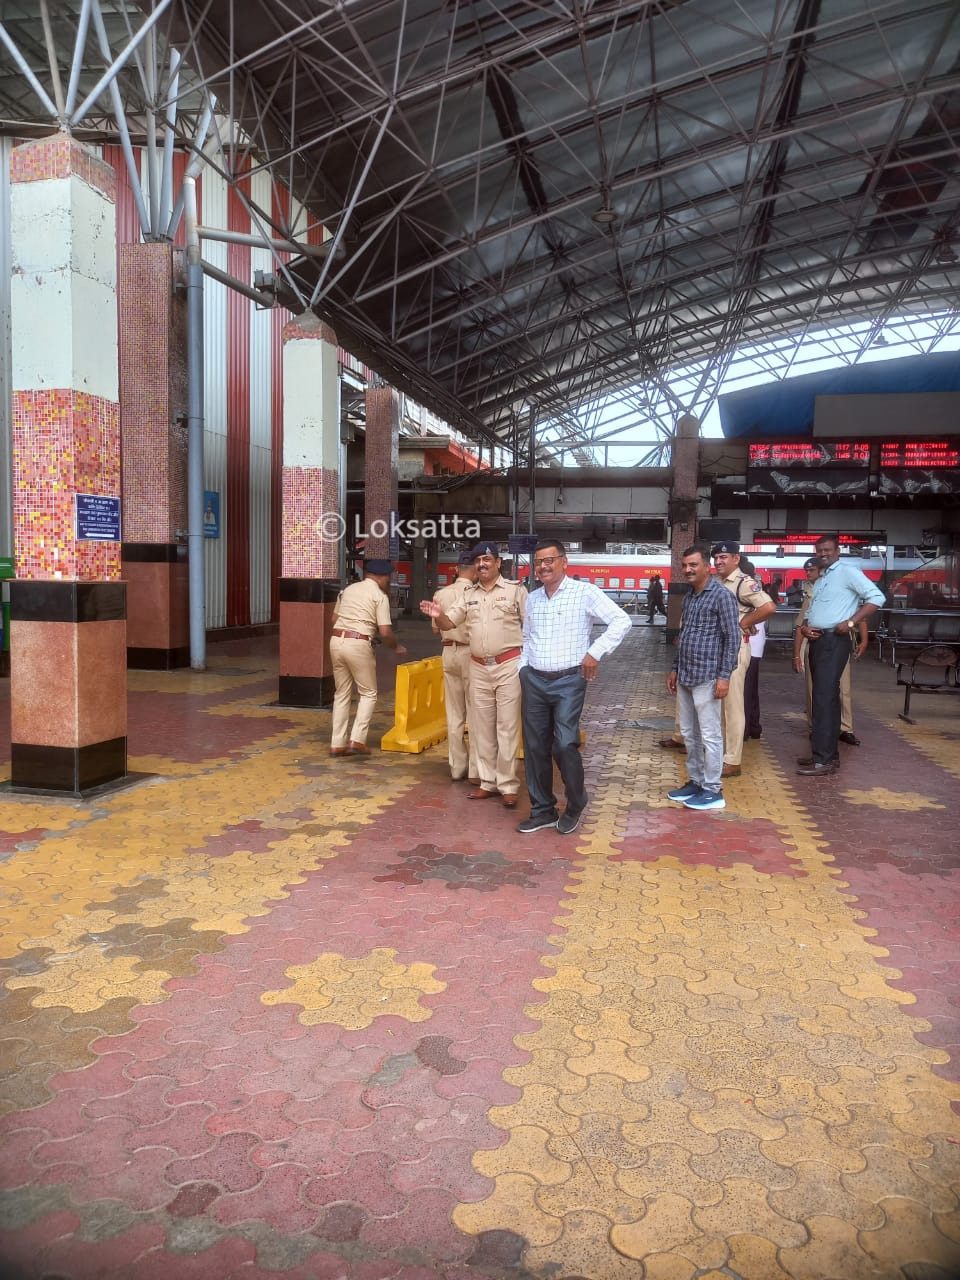 Bomb like object found in Pune Railway Station